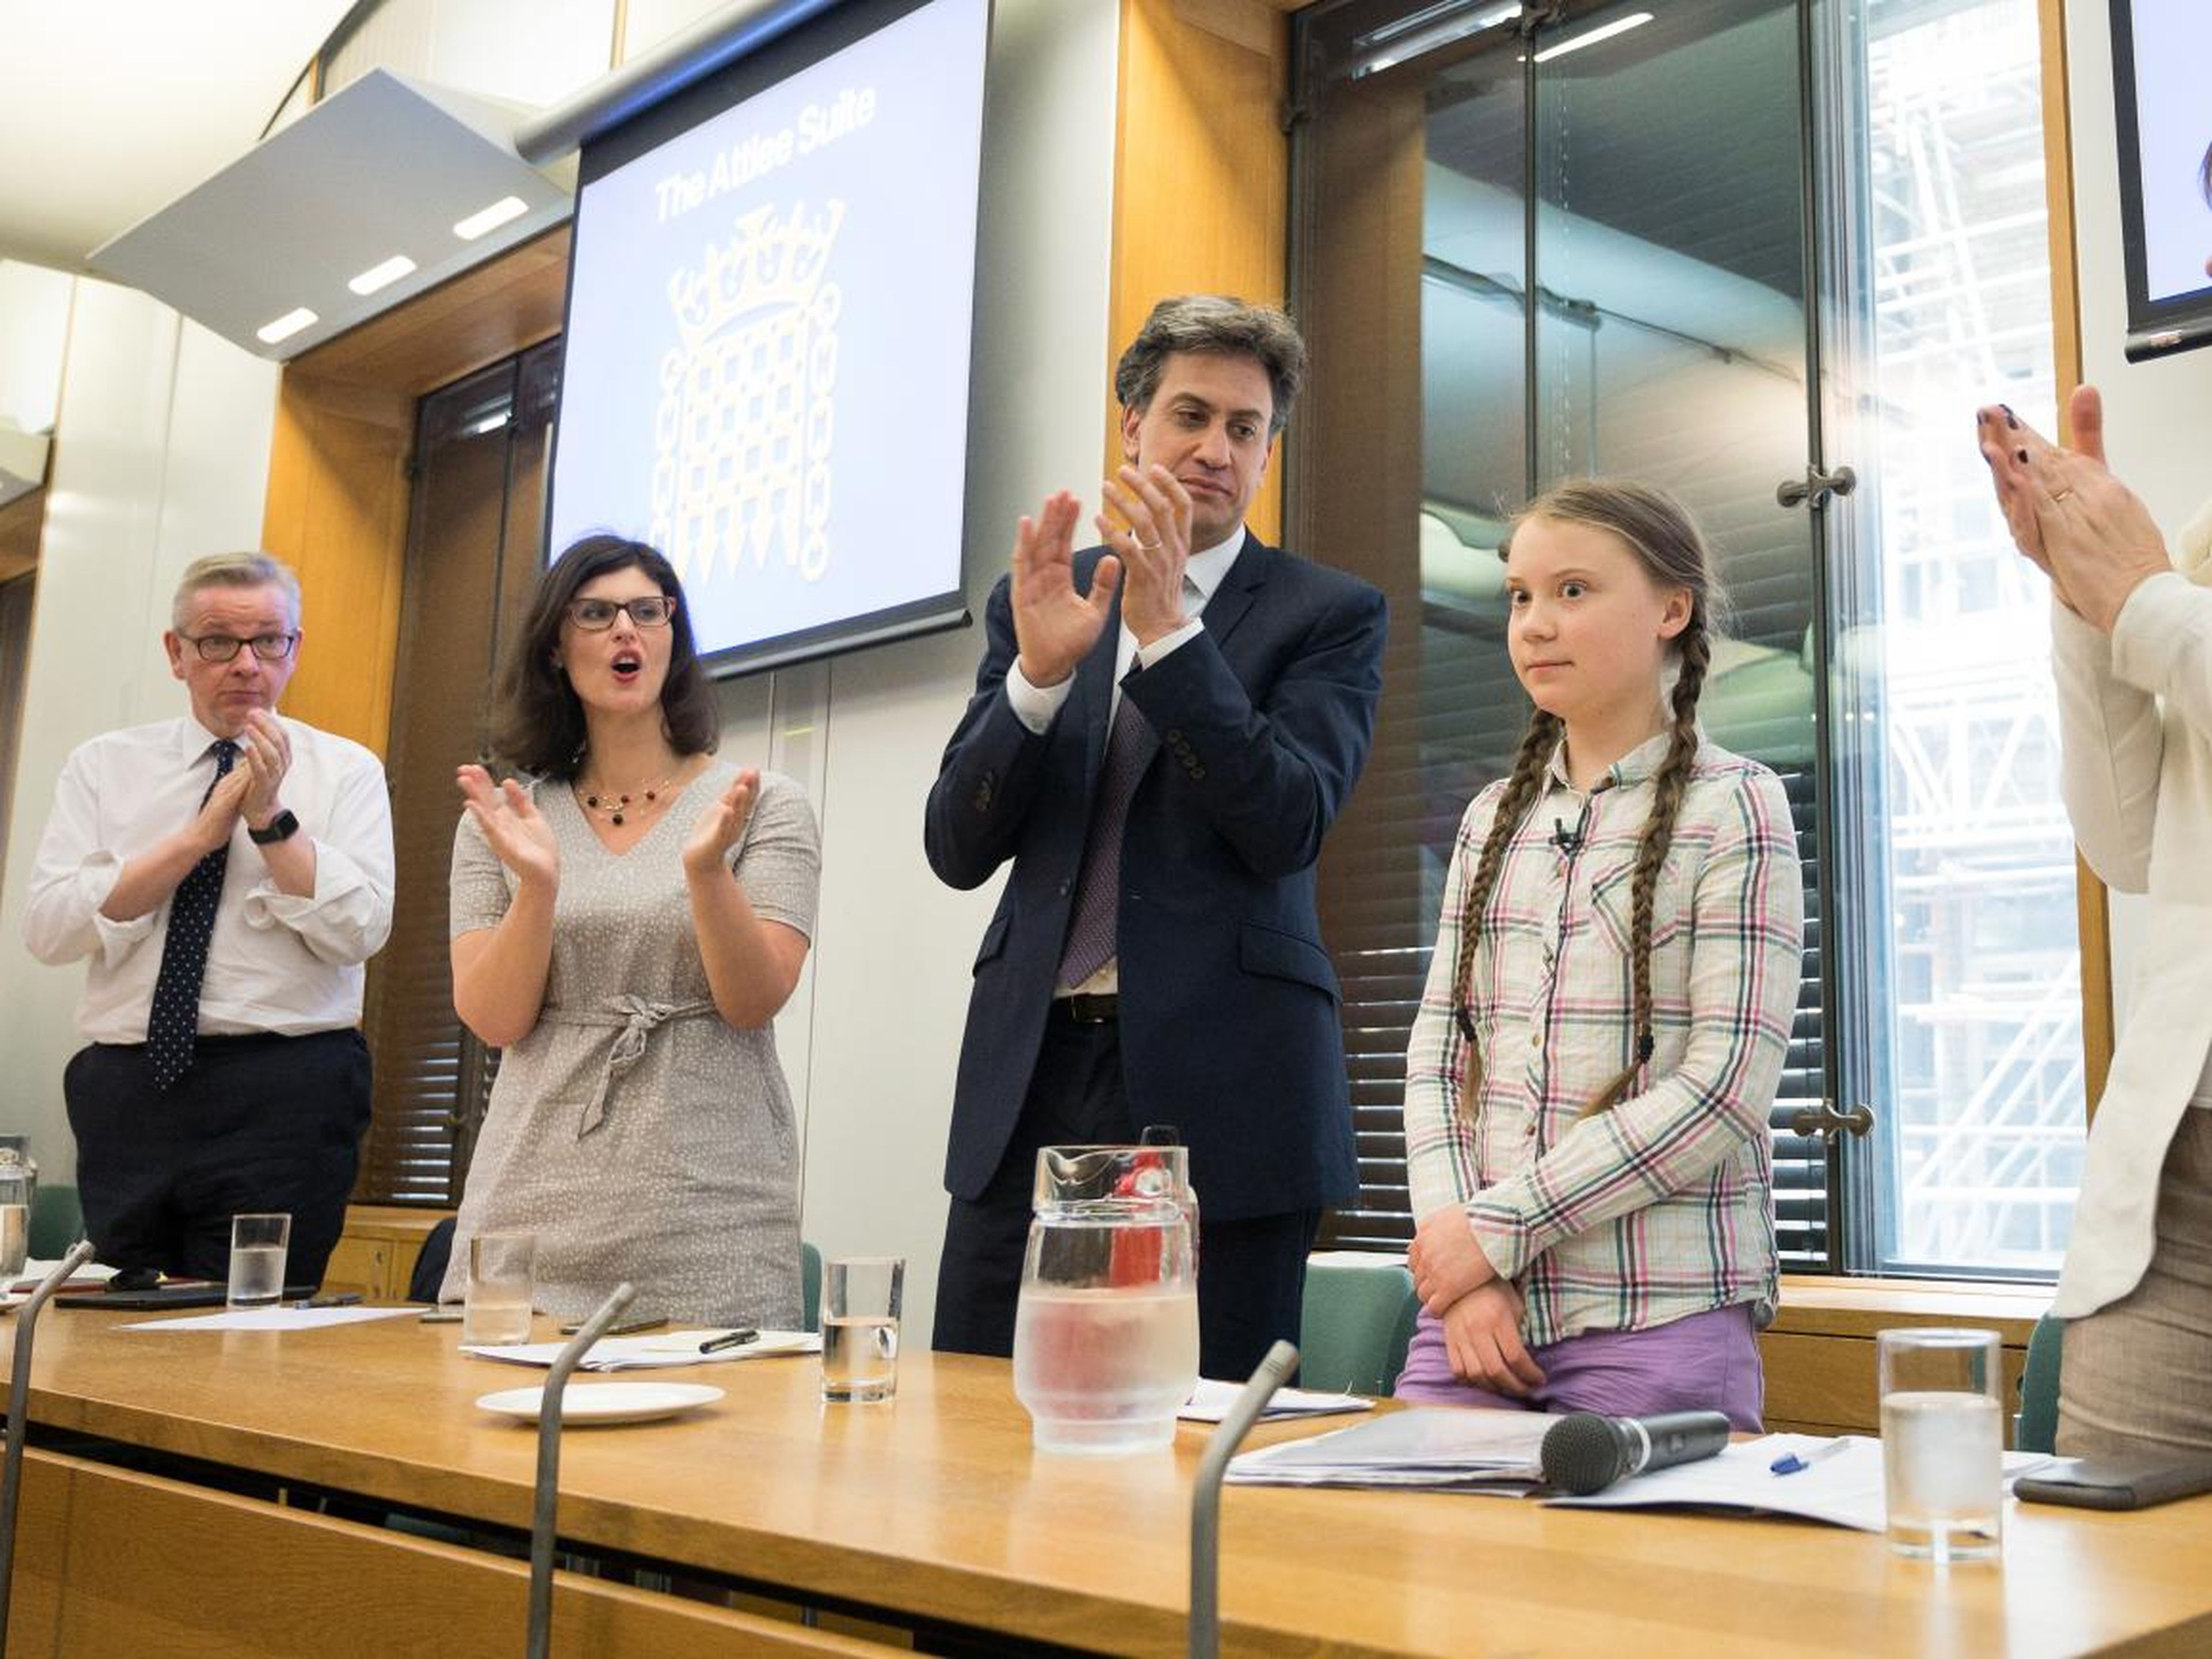 Greta Thunberg meets with former Climate Change Minister Ed Miliband (third from left) and other UK politicians.